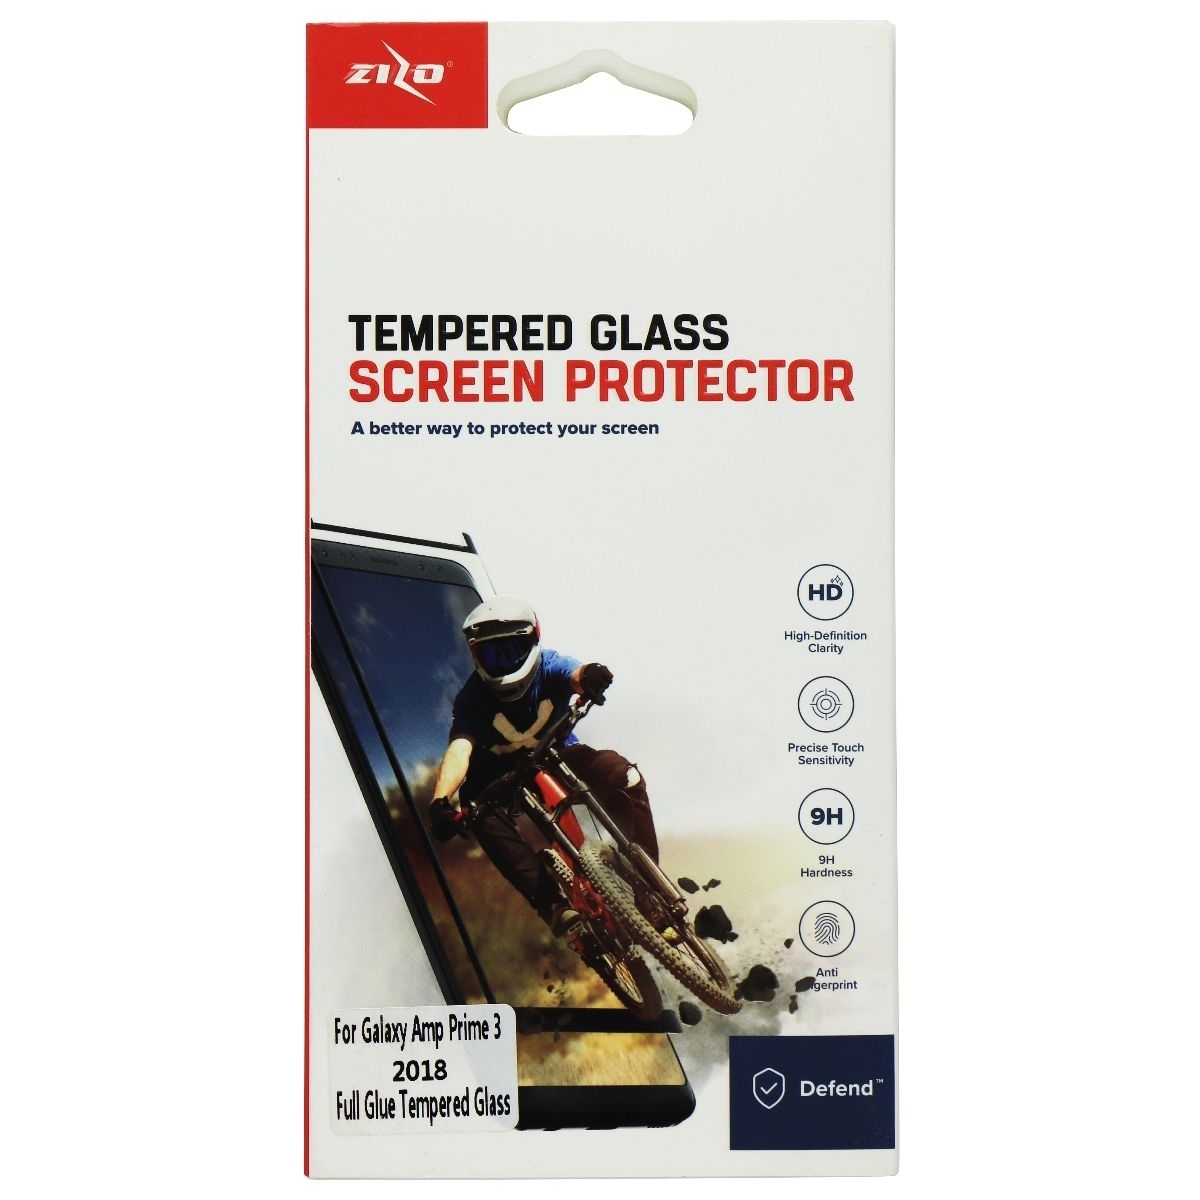 Zizo Tempered Glass Screen Protector For Galaxy Amp Prime 3 - Clear (Refurbished)